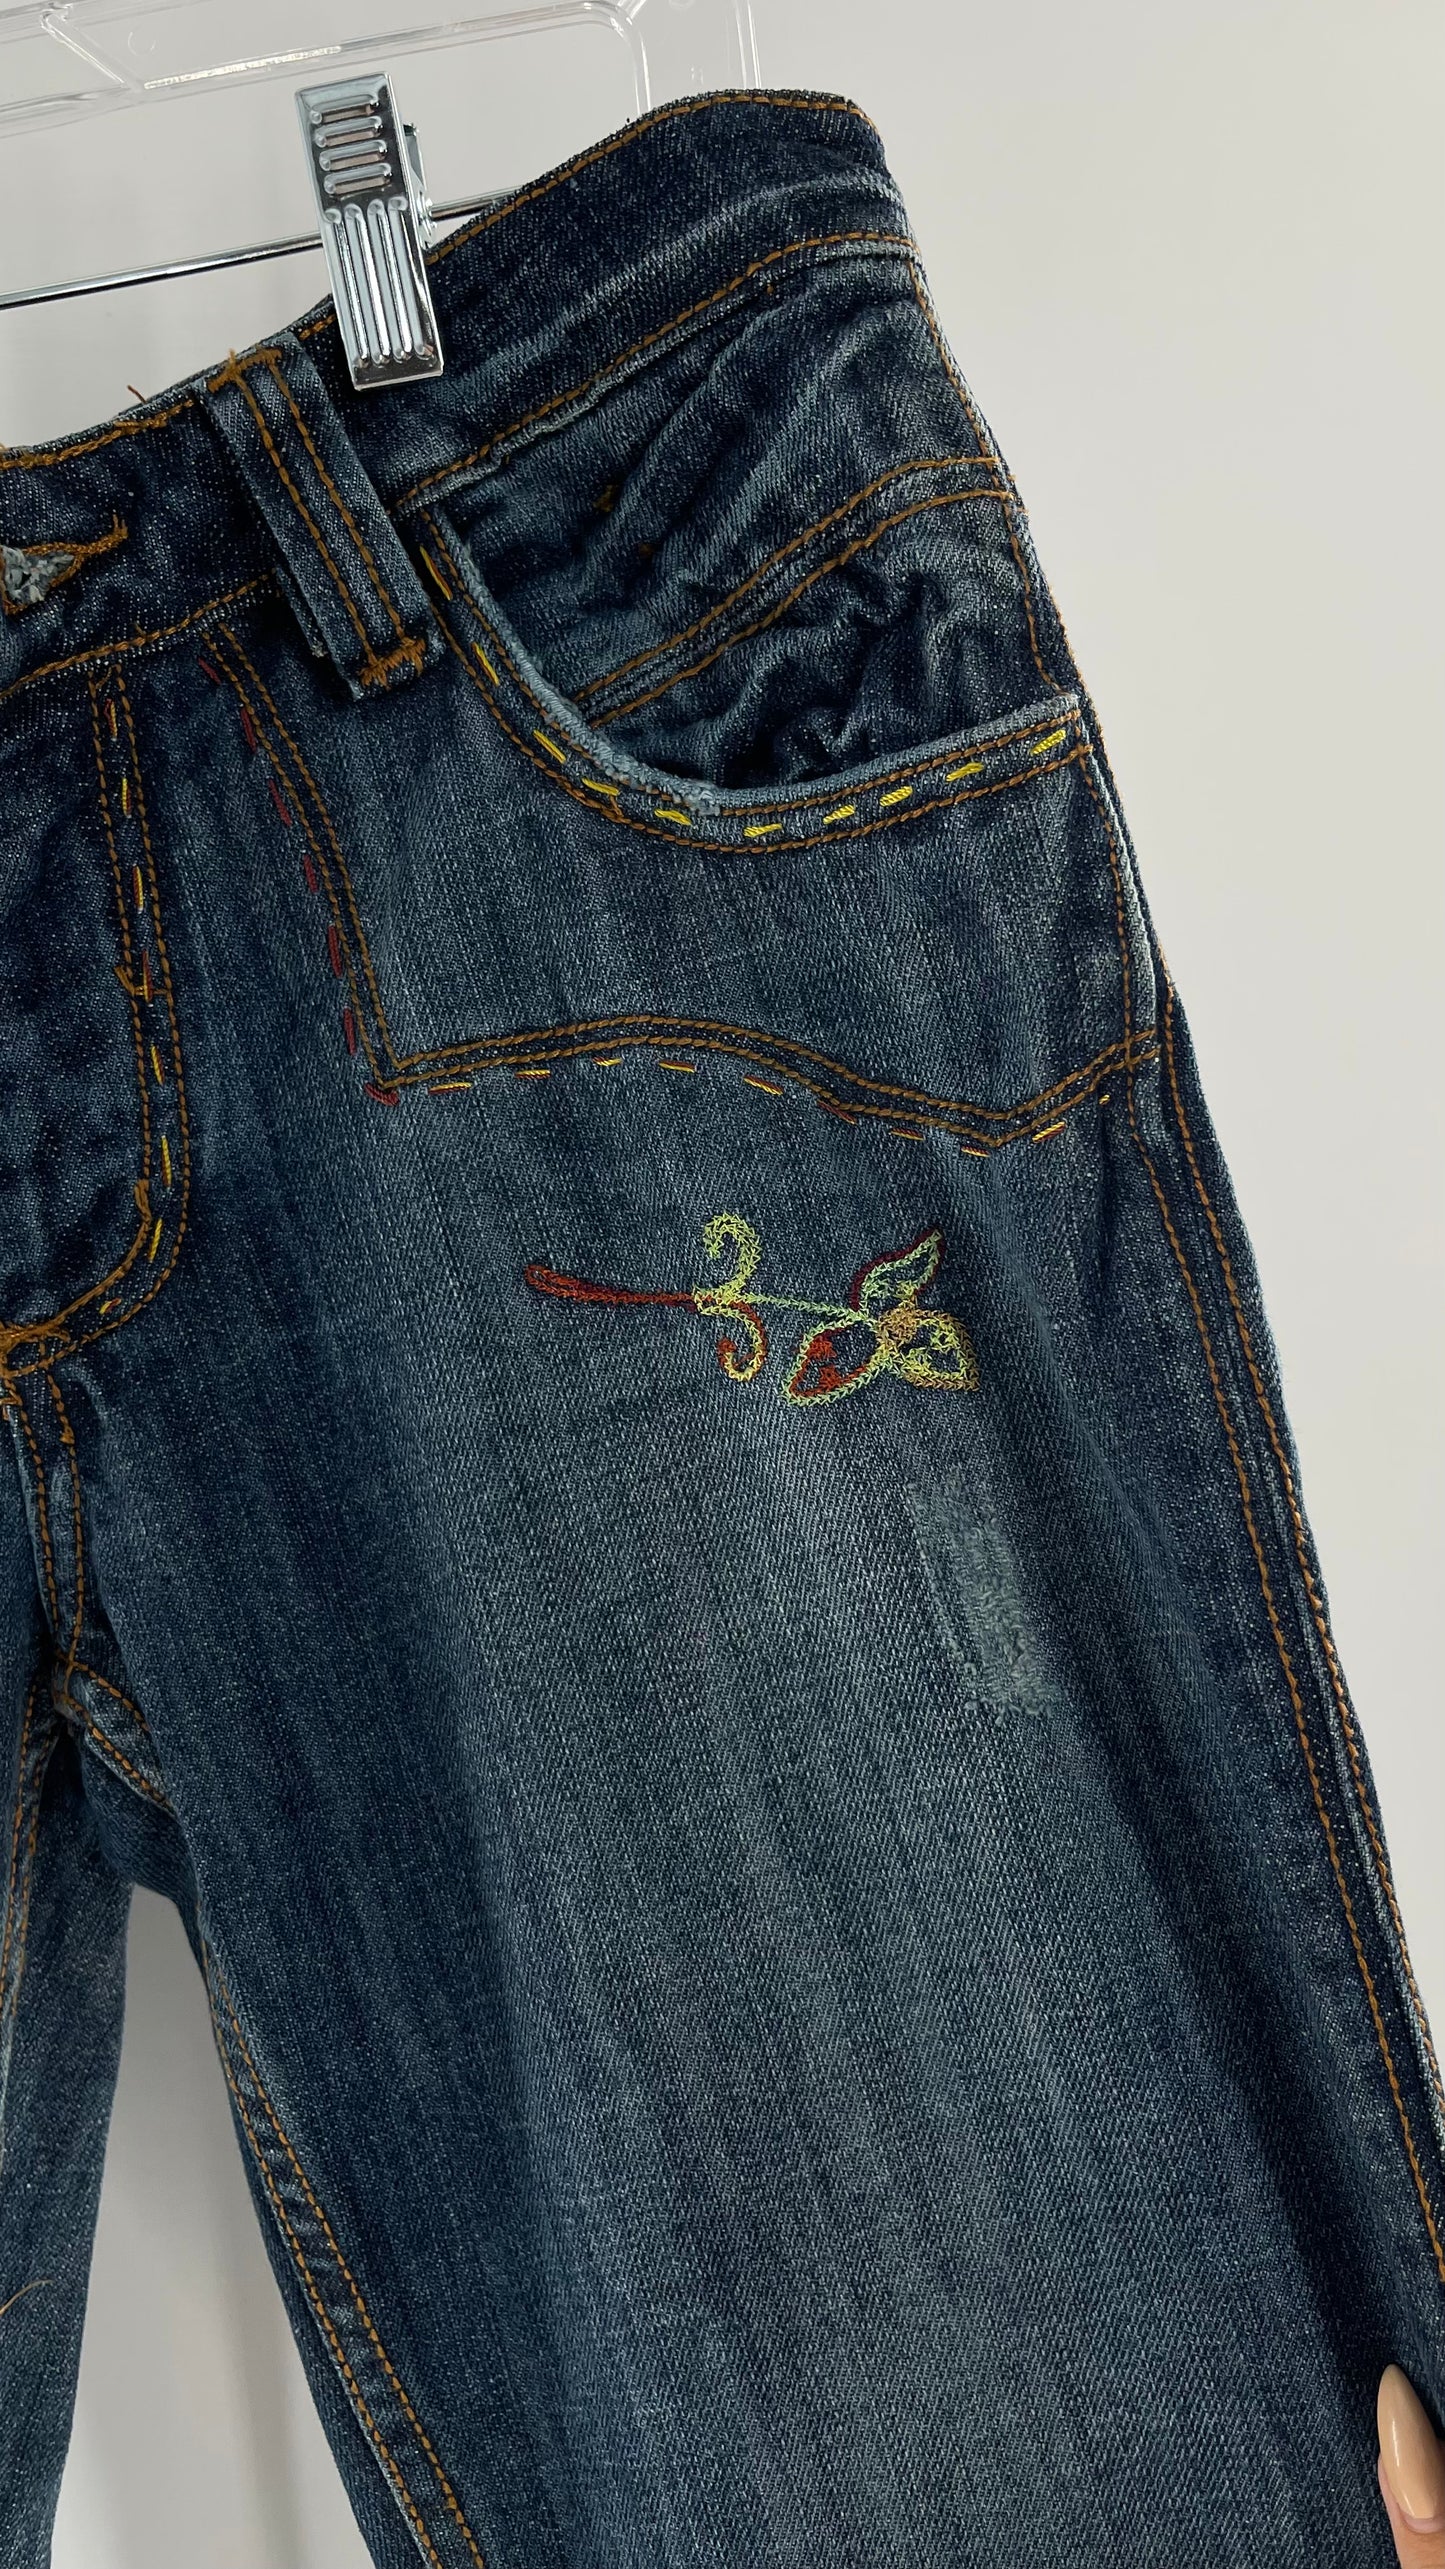 Vintage RARE Antik Denim Kick Flares with Embroidered Flower Design and Contrast Stitching (28)